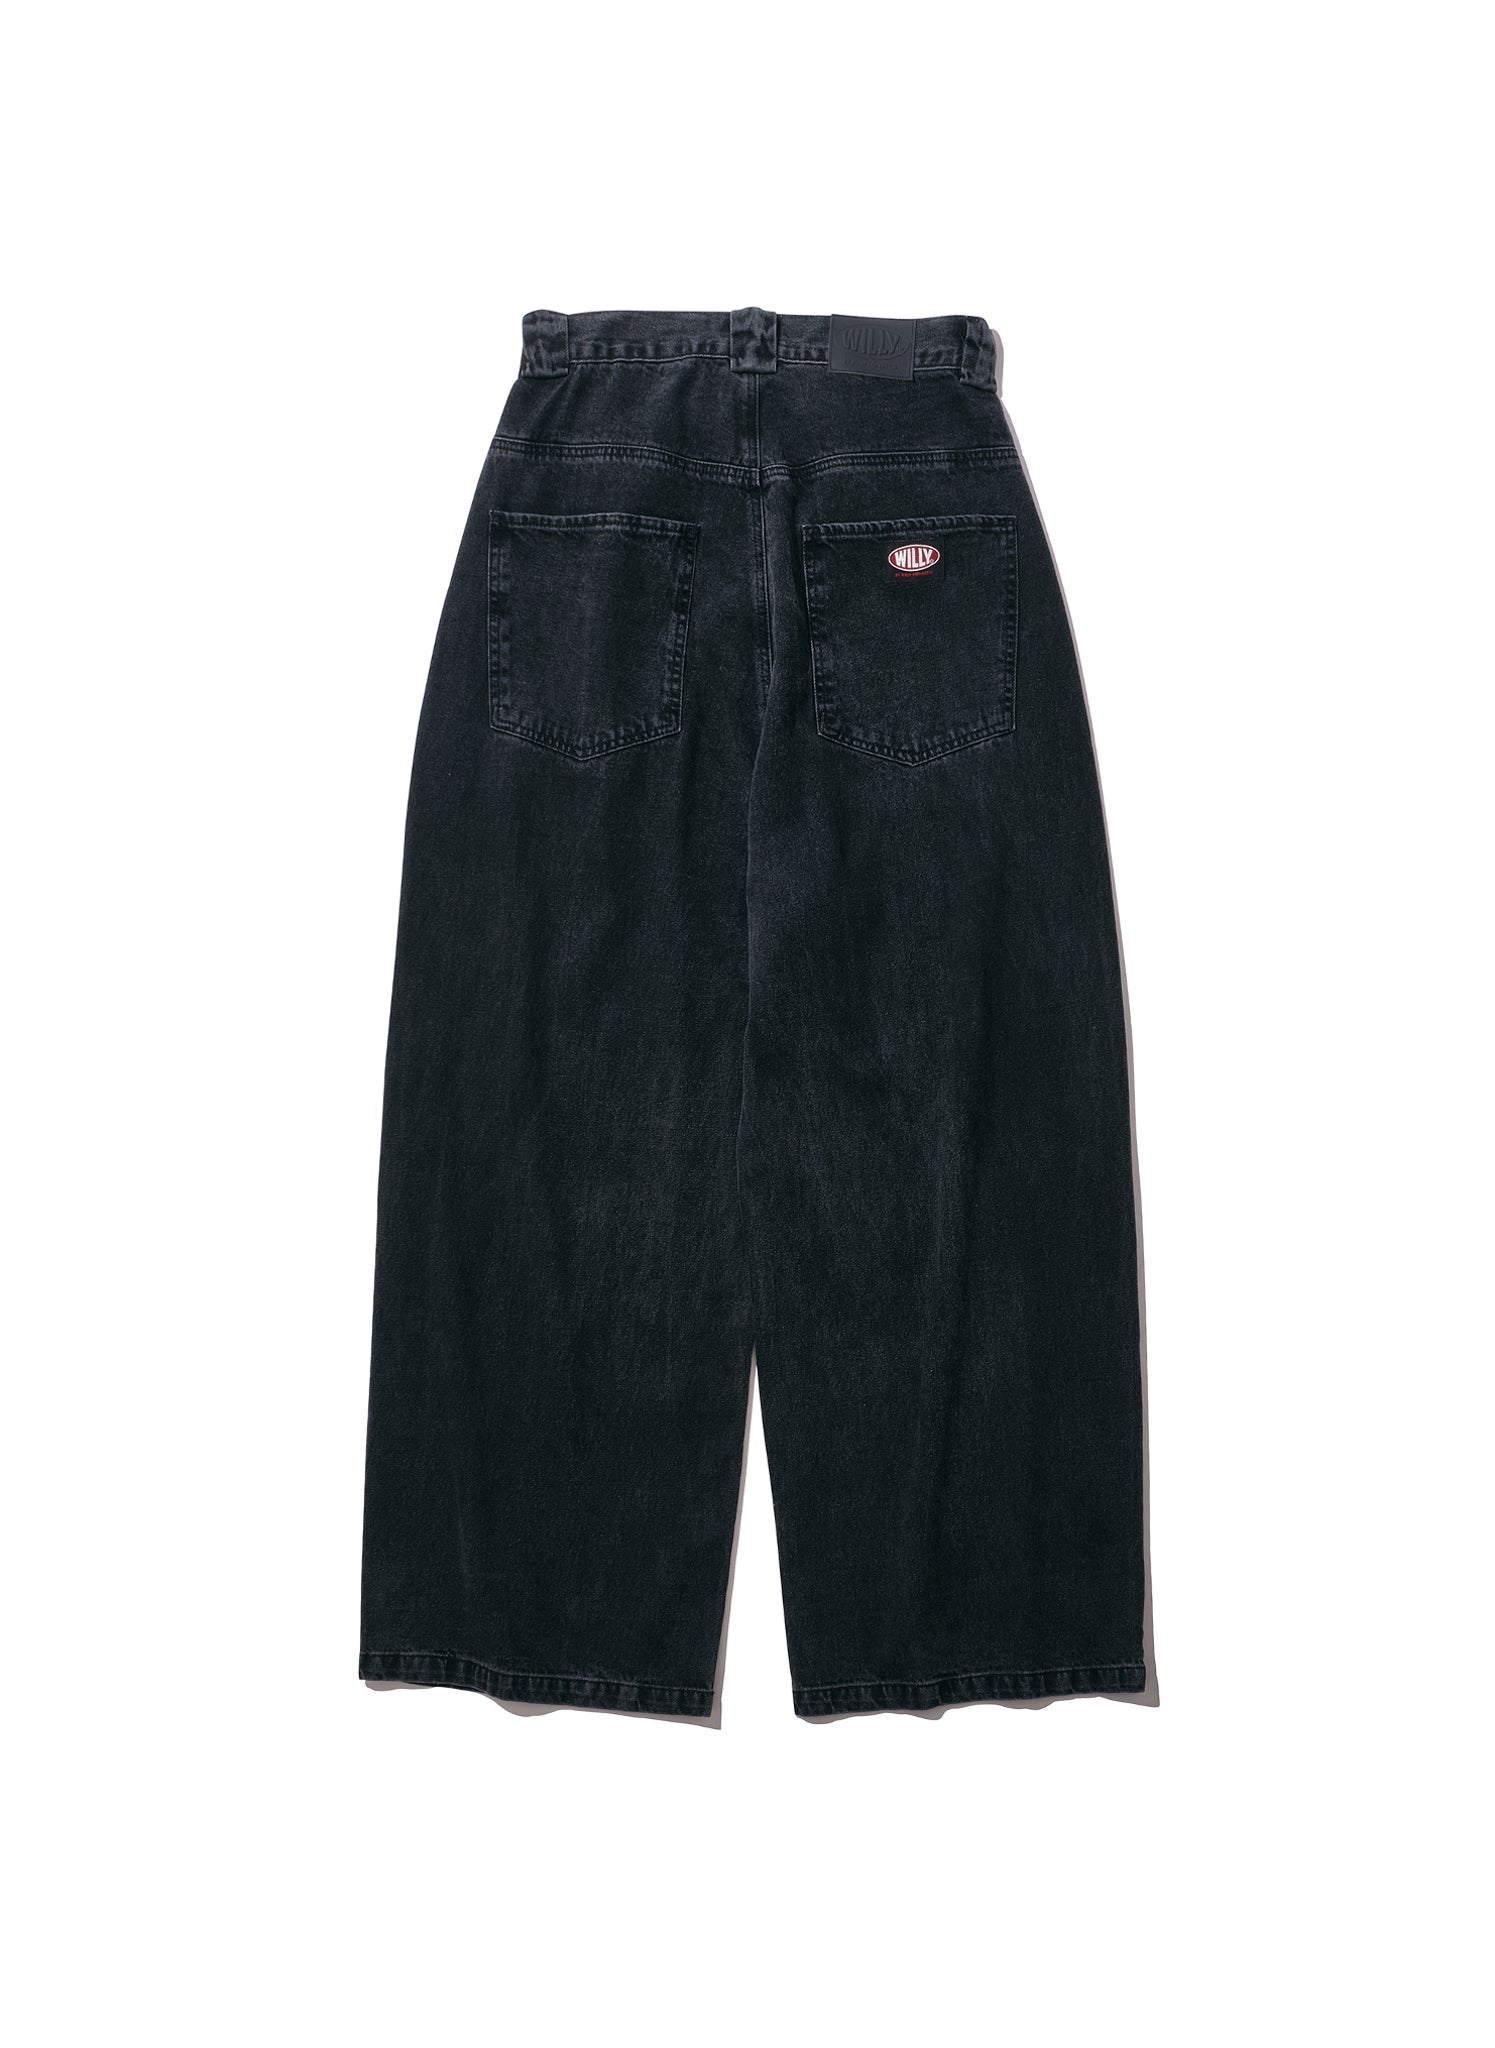 WILLY CHAVARRIA / SILVERLAKE JEAN WASHED BLACK